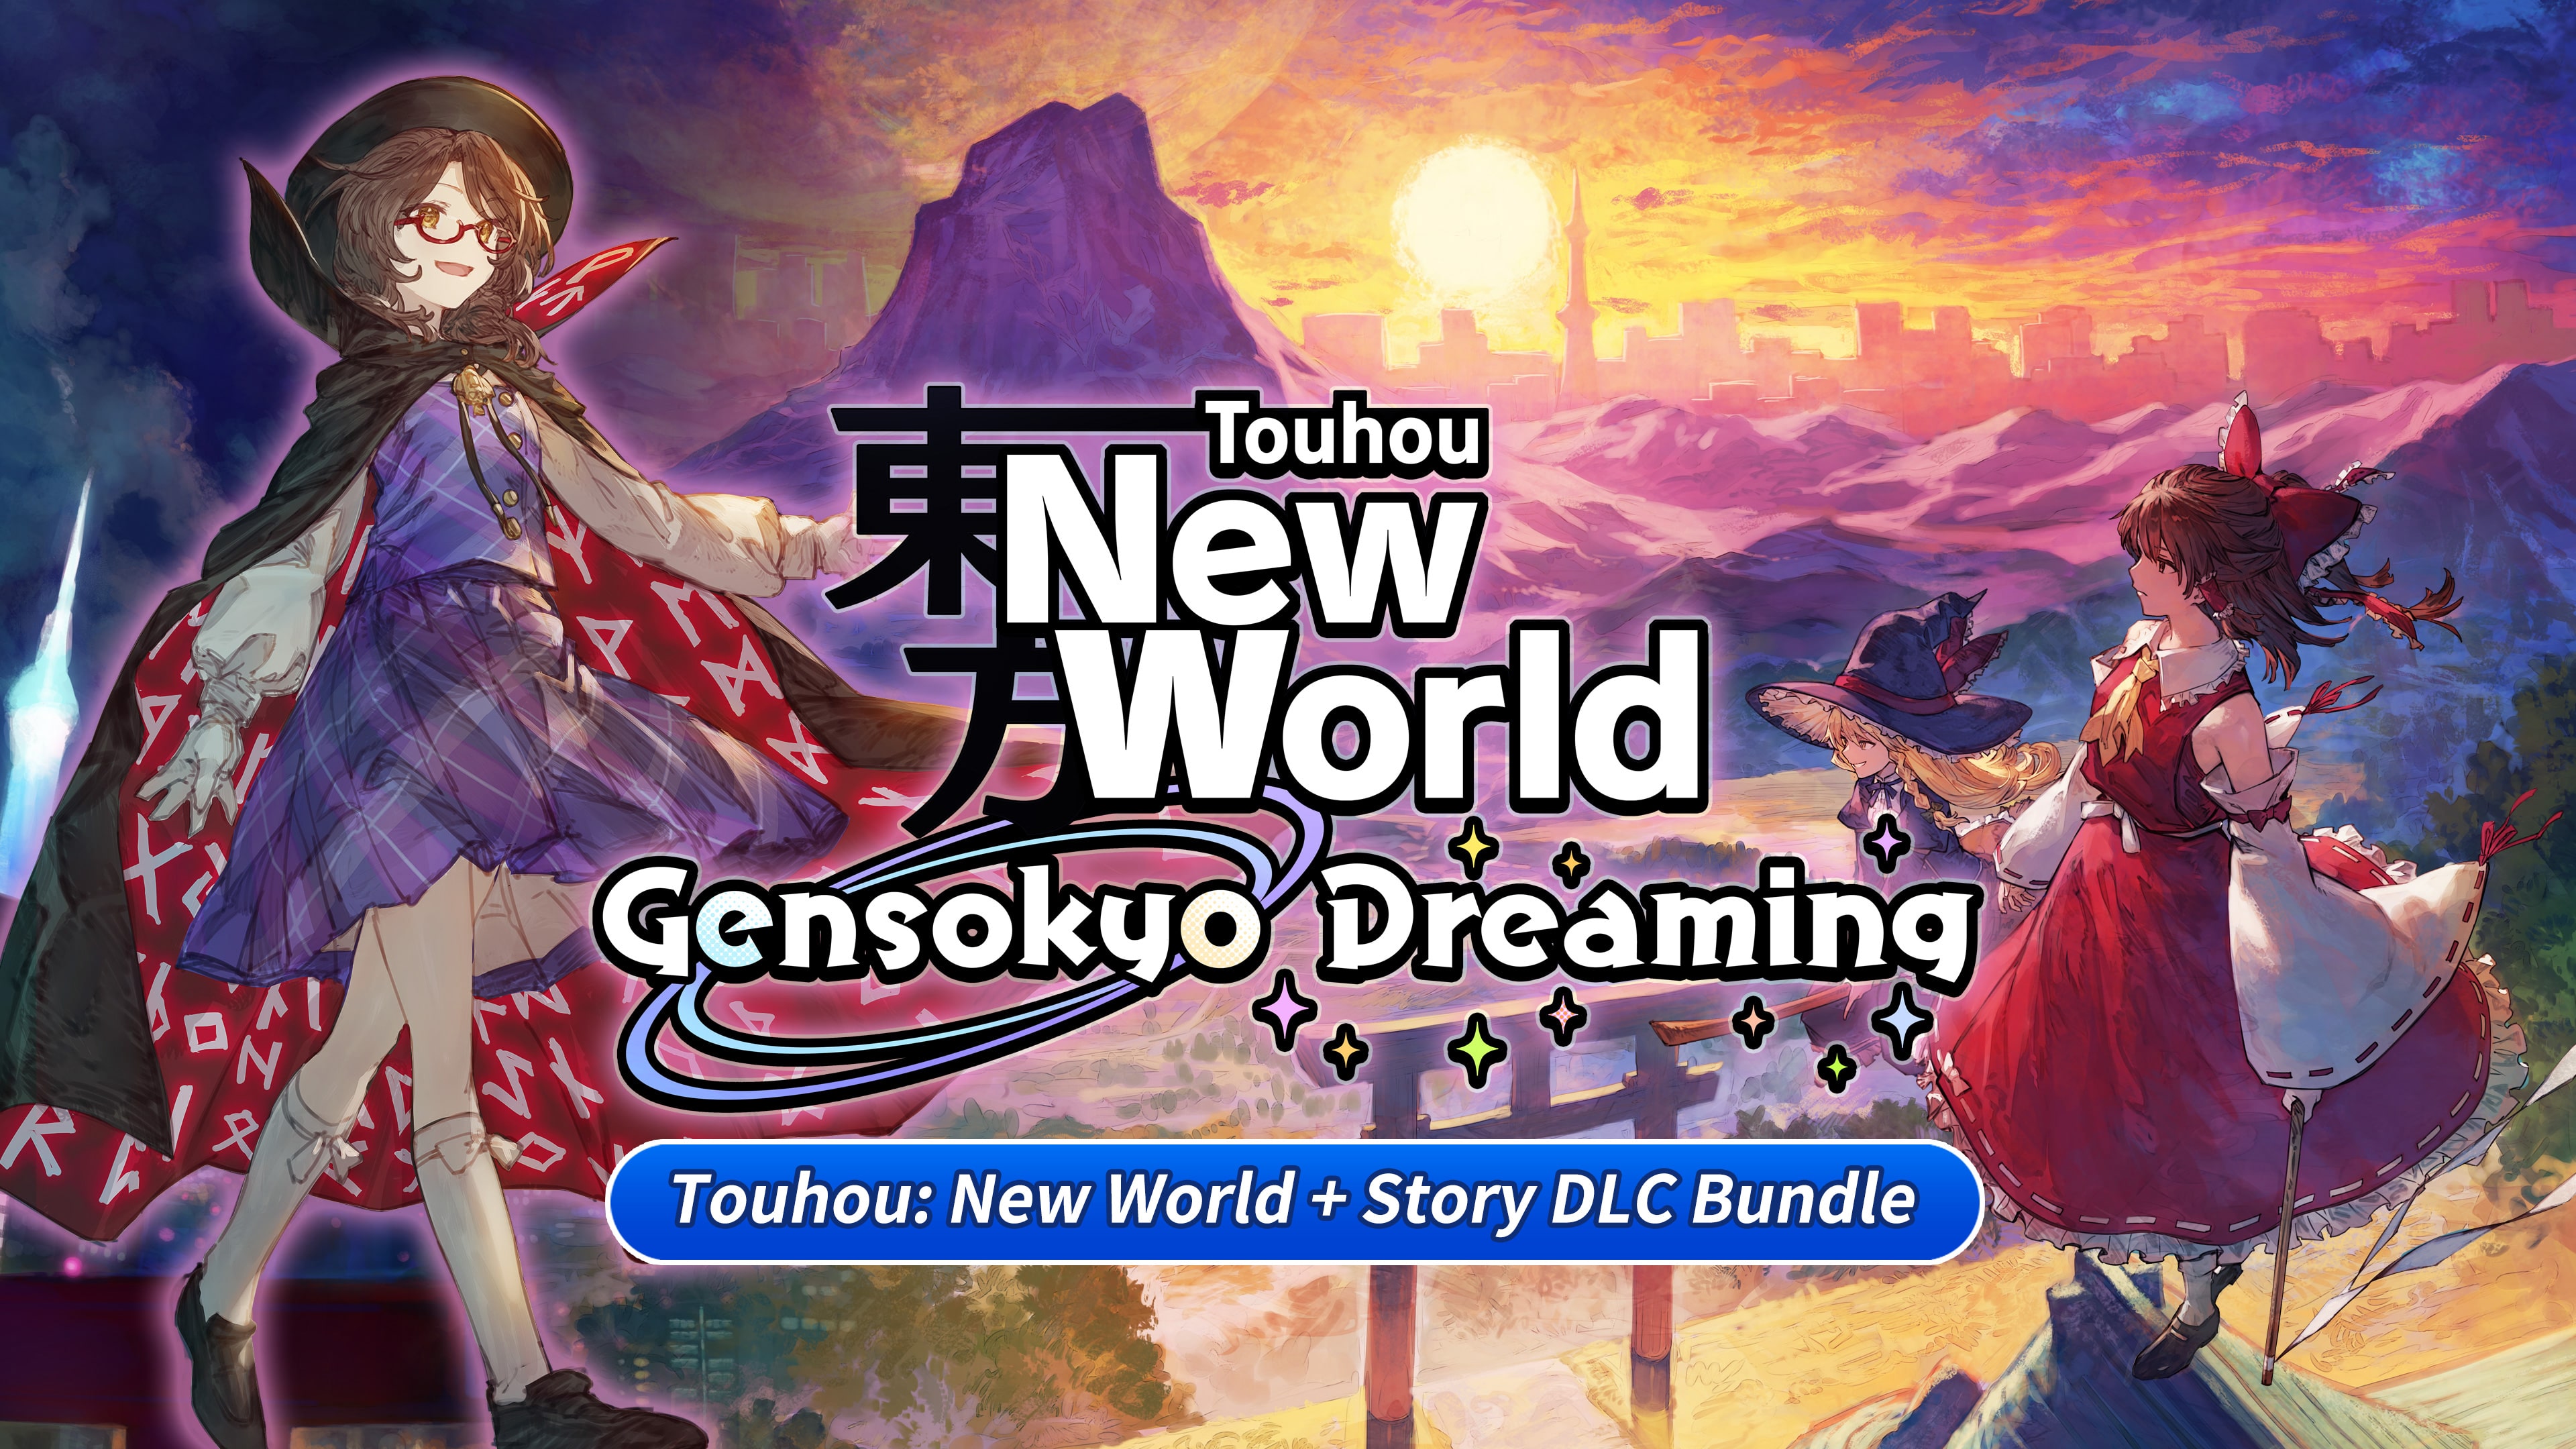 Touhou: New World + Story DLC Bundle PS4 & PS5 (Simplified Chinese, English, Japanese, Traditional Chinese)